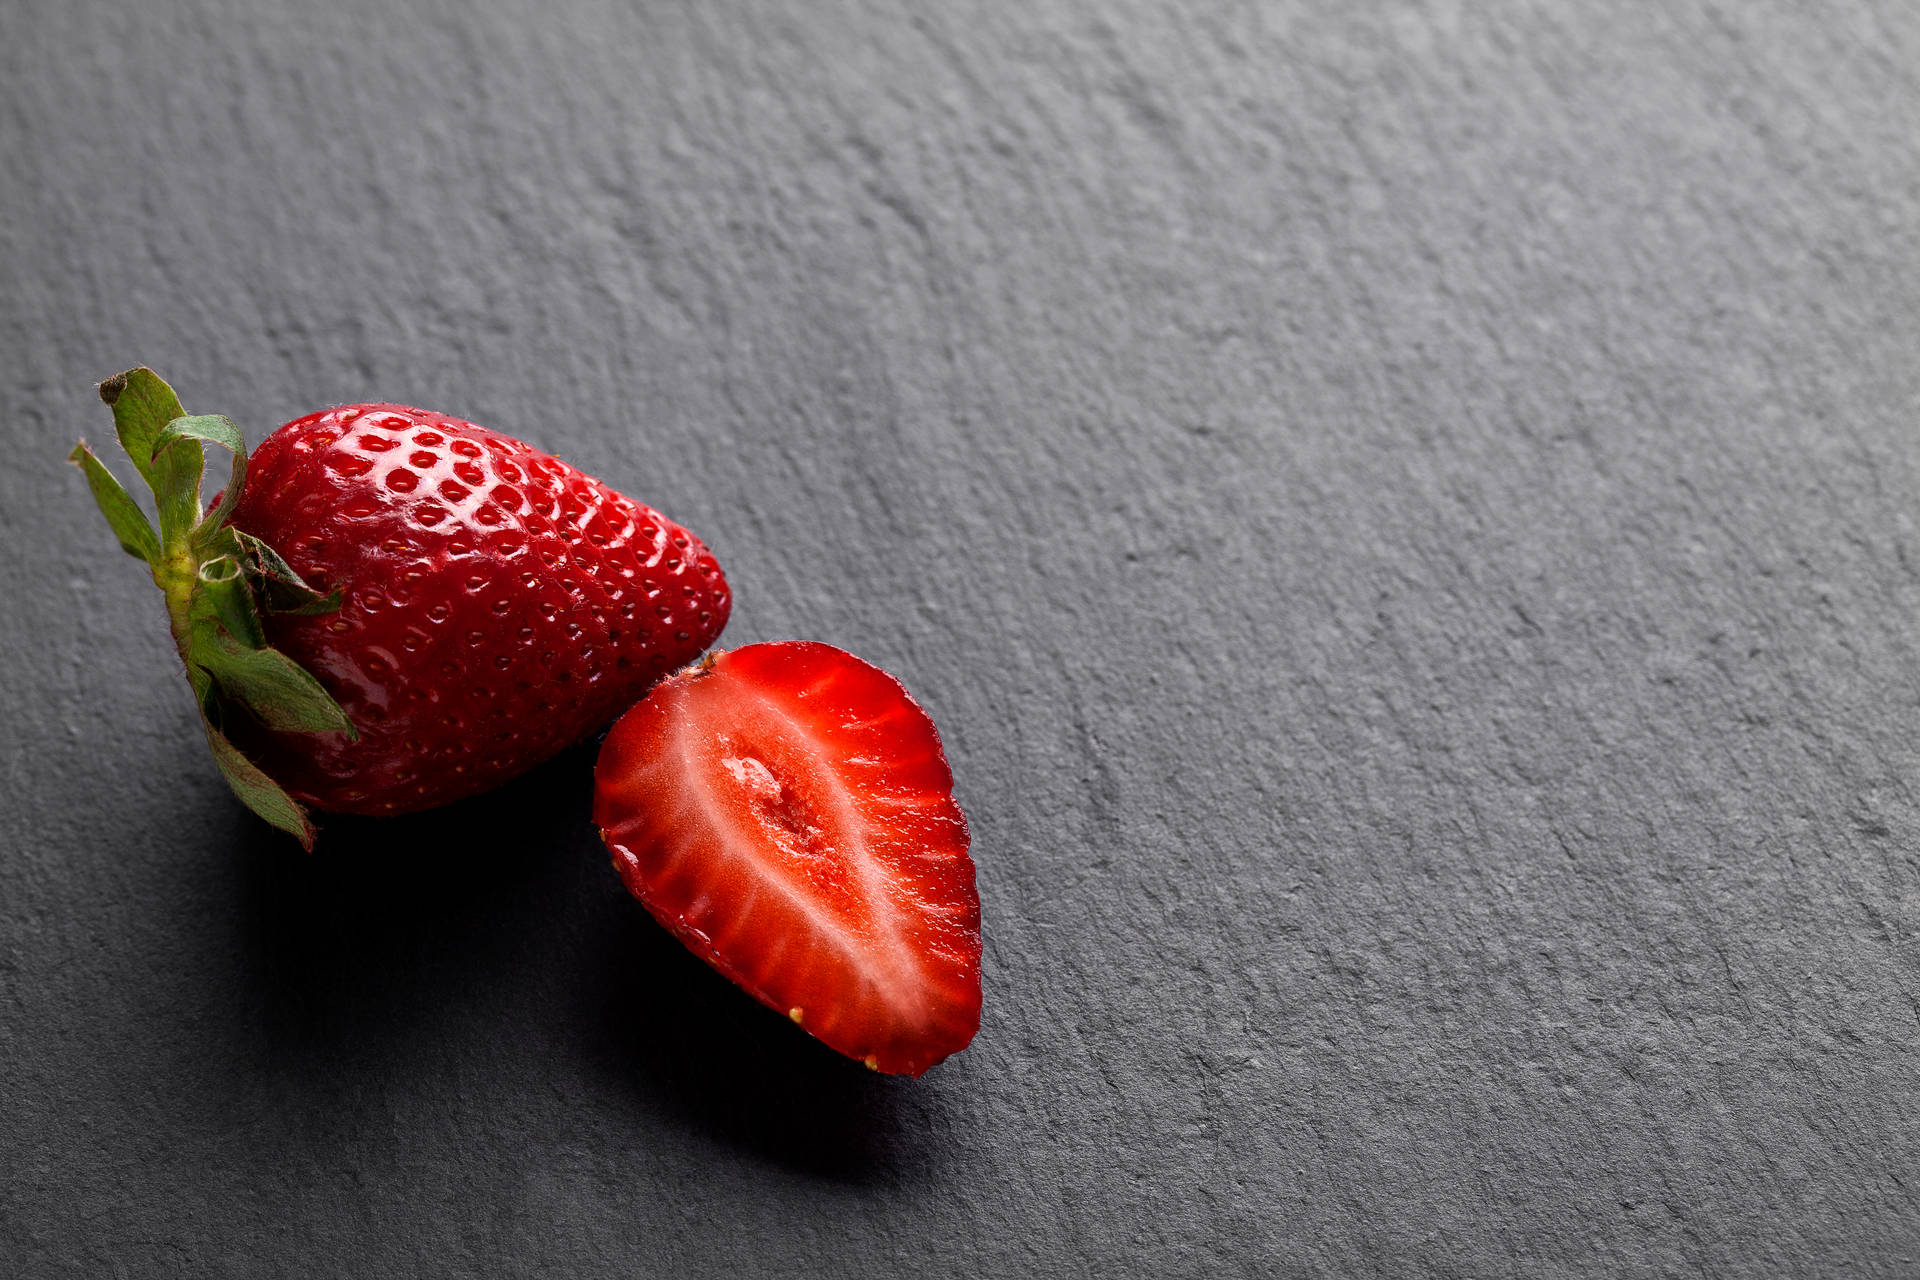 5616X3744 Strawberry Wallpaper and Background